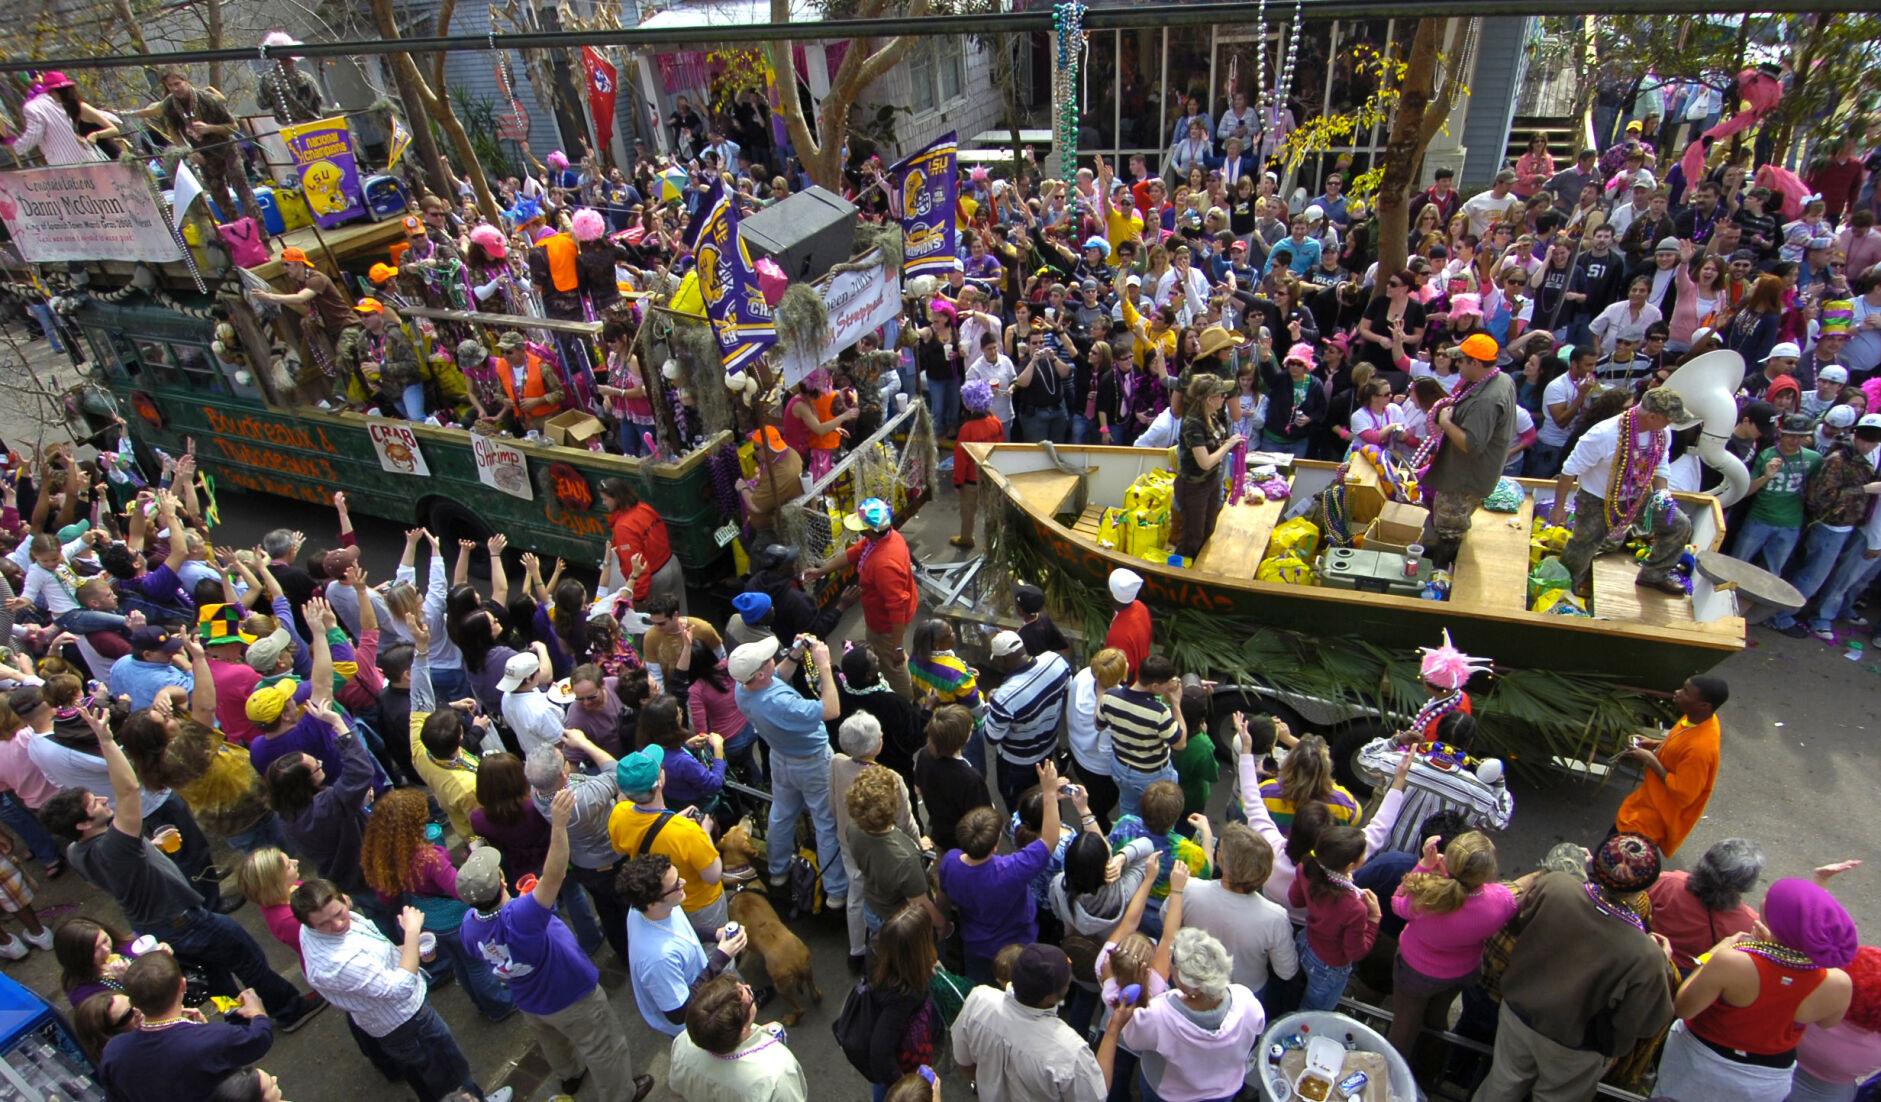 Baton Rouge Mardi Gras 2022 Here's what we know about the return of